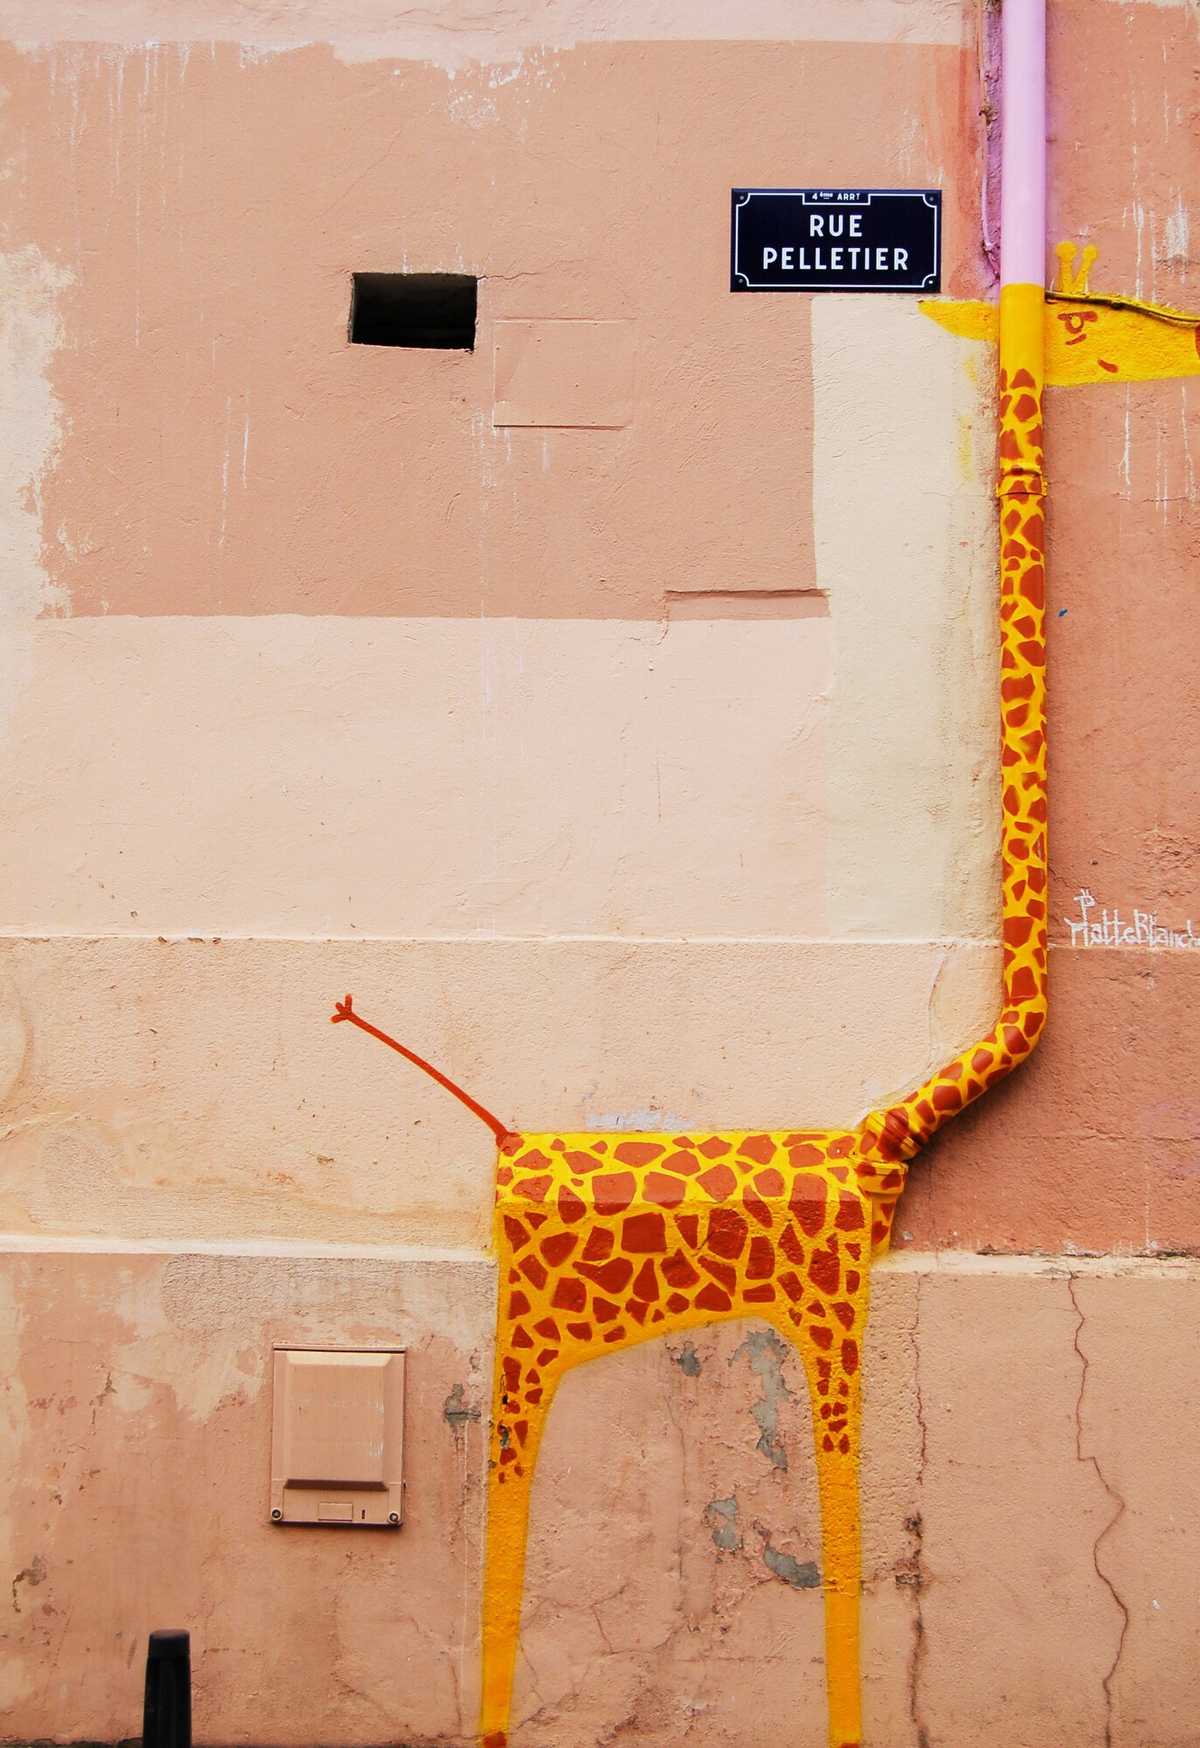 Dynamically-typed giraffe roaming the streets of Paris. Photo by Chris Barbalis.